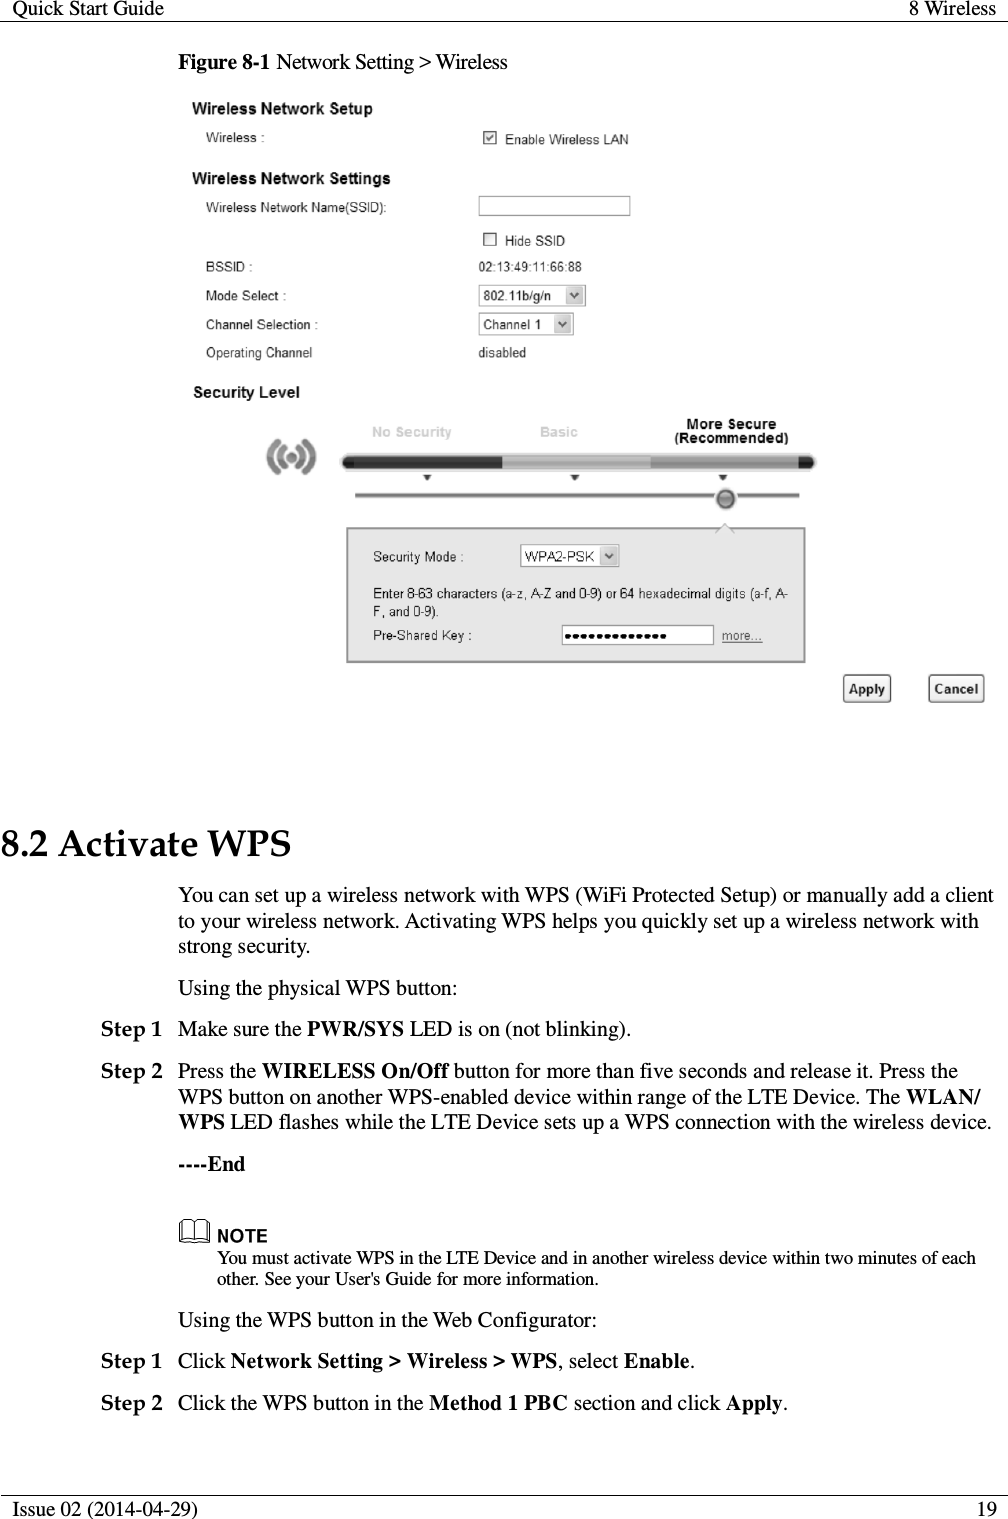 Quick Start Guide 8 Wireless  Issue 02 (2014-04-29)  19  Figure 8-1 Network Setting &gt; Wireless   8.2 Activate WPS You can set up a wireless network with WPS (WiFi Protected Setup) or manually add a client to your wireless network. Activating WPS helps you quickly set up a wireless network with strong security. Using the physical WPS button: Step 1 Make sure the PWR/SYS LED is on (not blinking). Step 2 Press the WIRELESS On/Off button for more than five seconds and release it. Press the WPS button on another WPS-enabled device within range of the LTE Device. The WLAN/ WPS LED flashes while the LTE Device sets up a WPS connection with the wireless device. ----End  You must activate WPS in the LTE Device and in another wireless device within two minutes of each other. See your User&apos;s Guide for more information. Using the WPS button in the Web Configurator: Step 1 Click Network Setting &gt; Wireless &gt; WPS, select Enable. Step 2 Click the WPS button in the Method 1 PBC section and click Apply. 